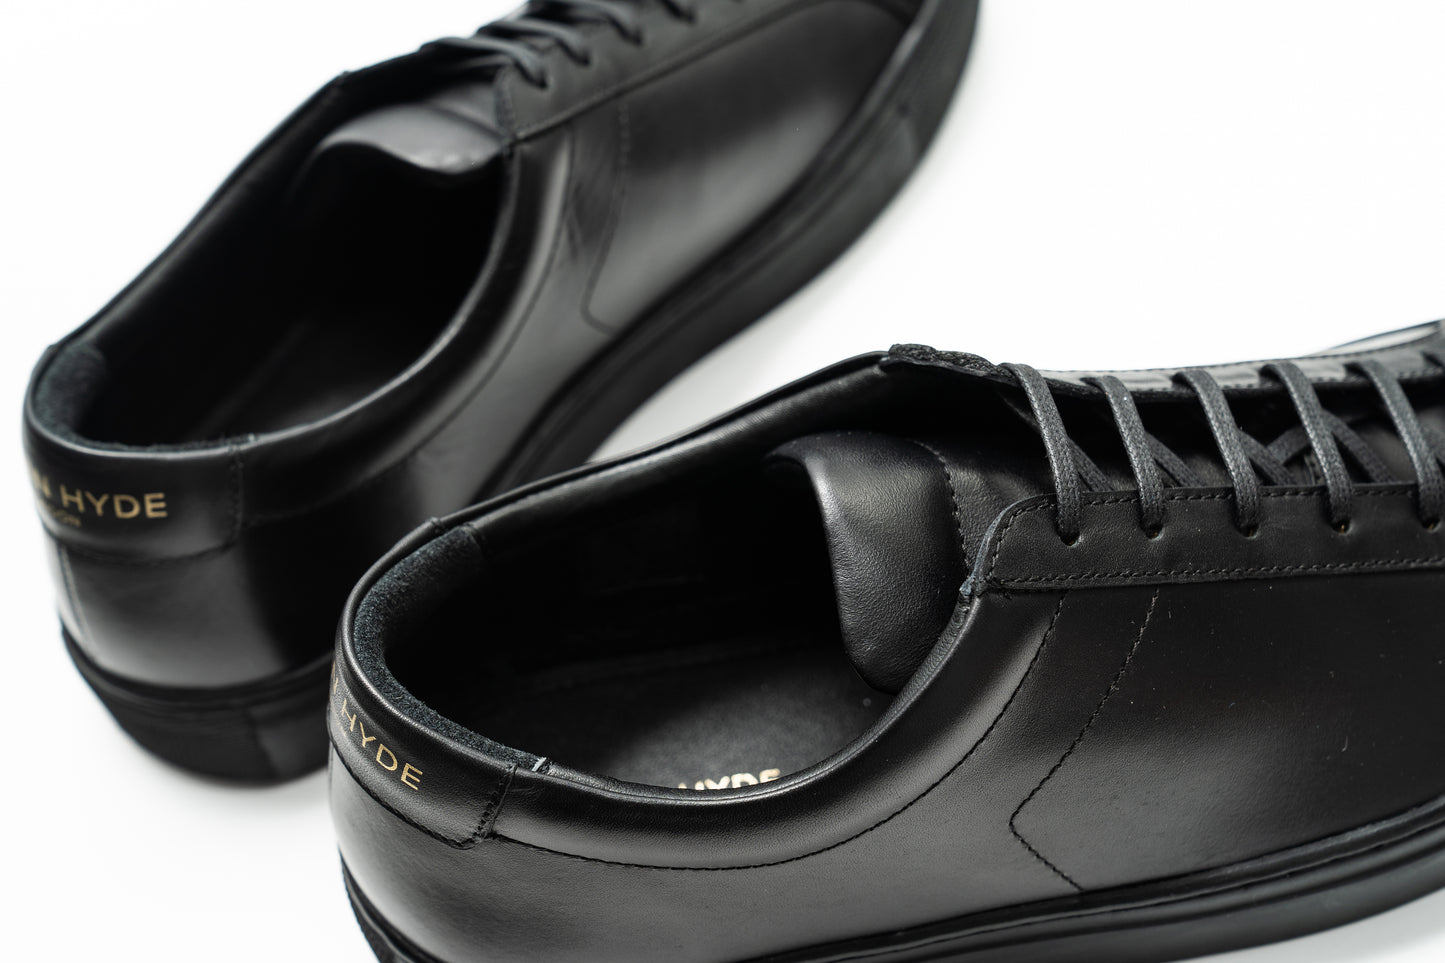 Men's black leather trainers with black sole